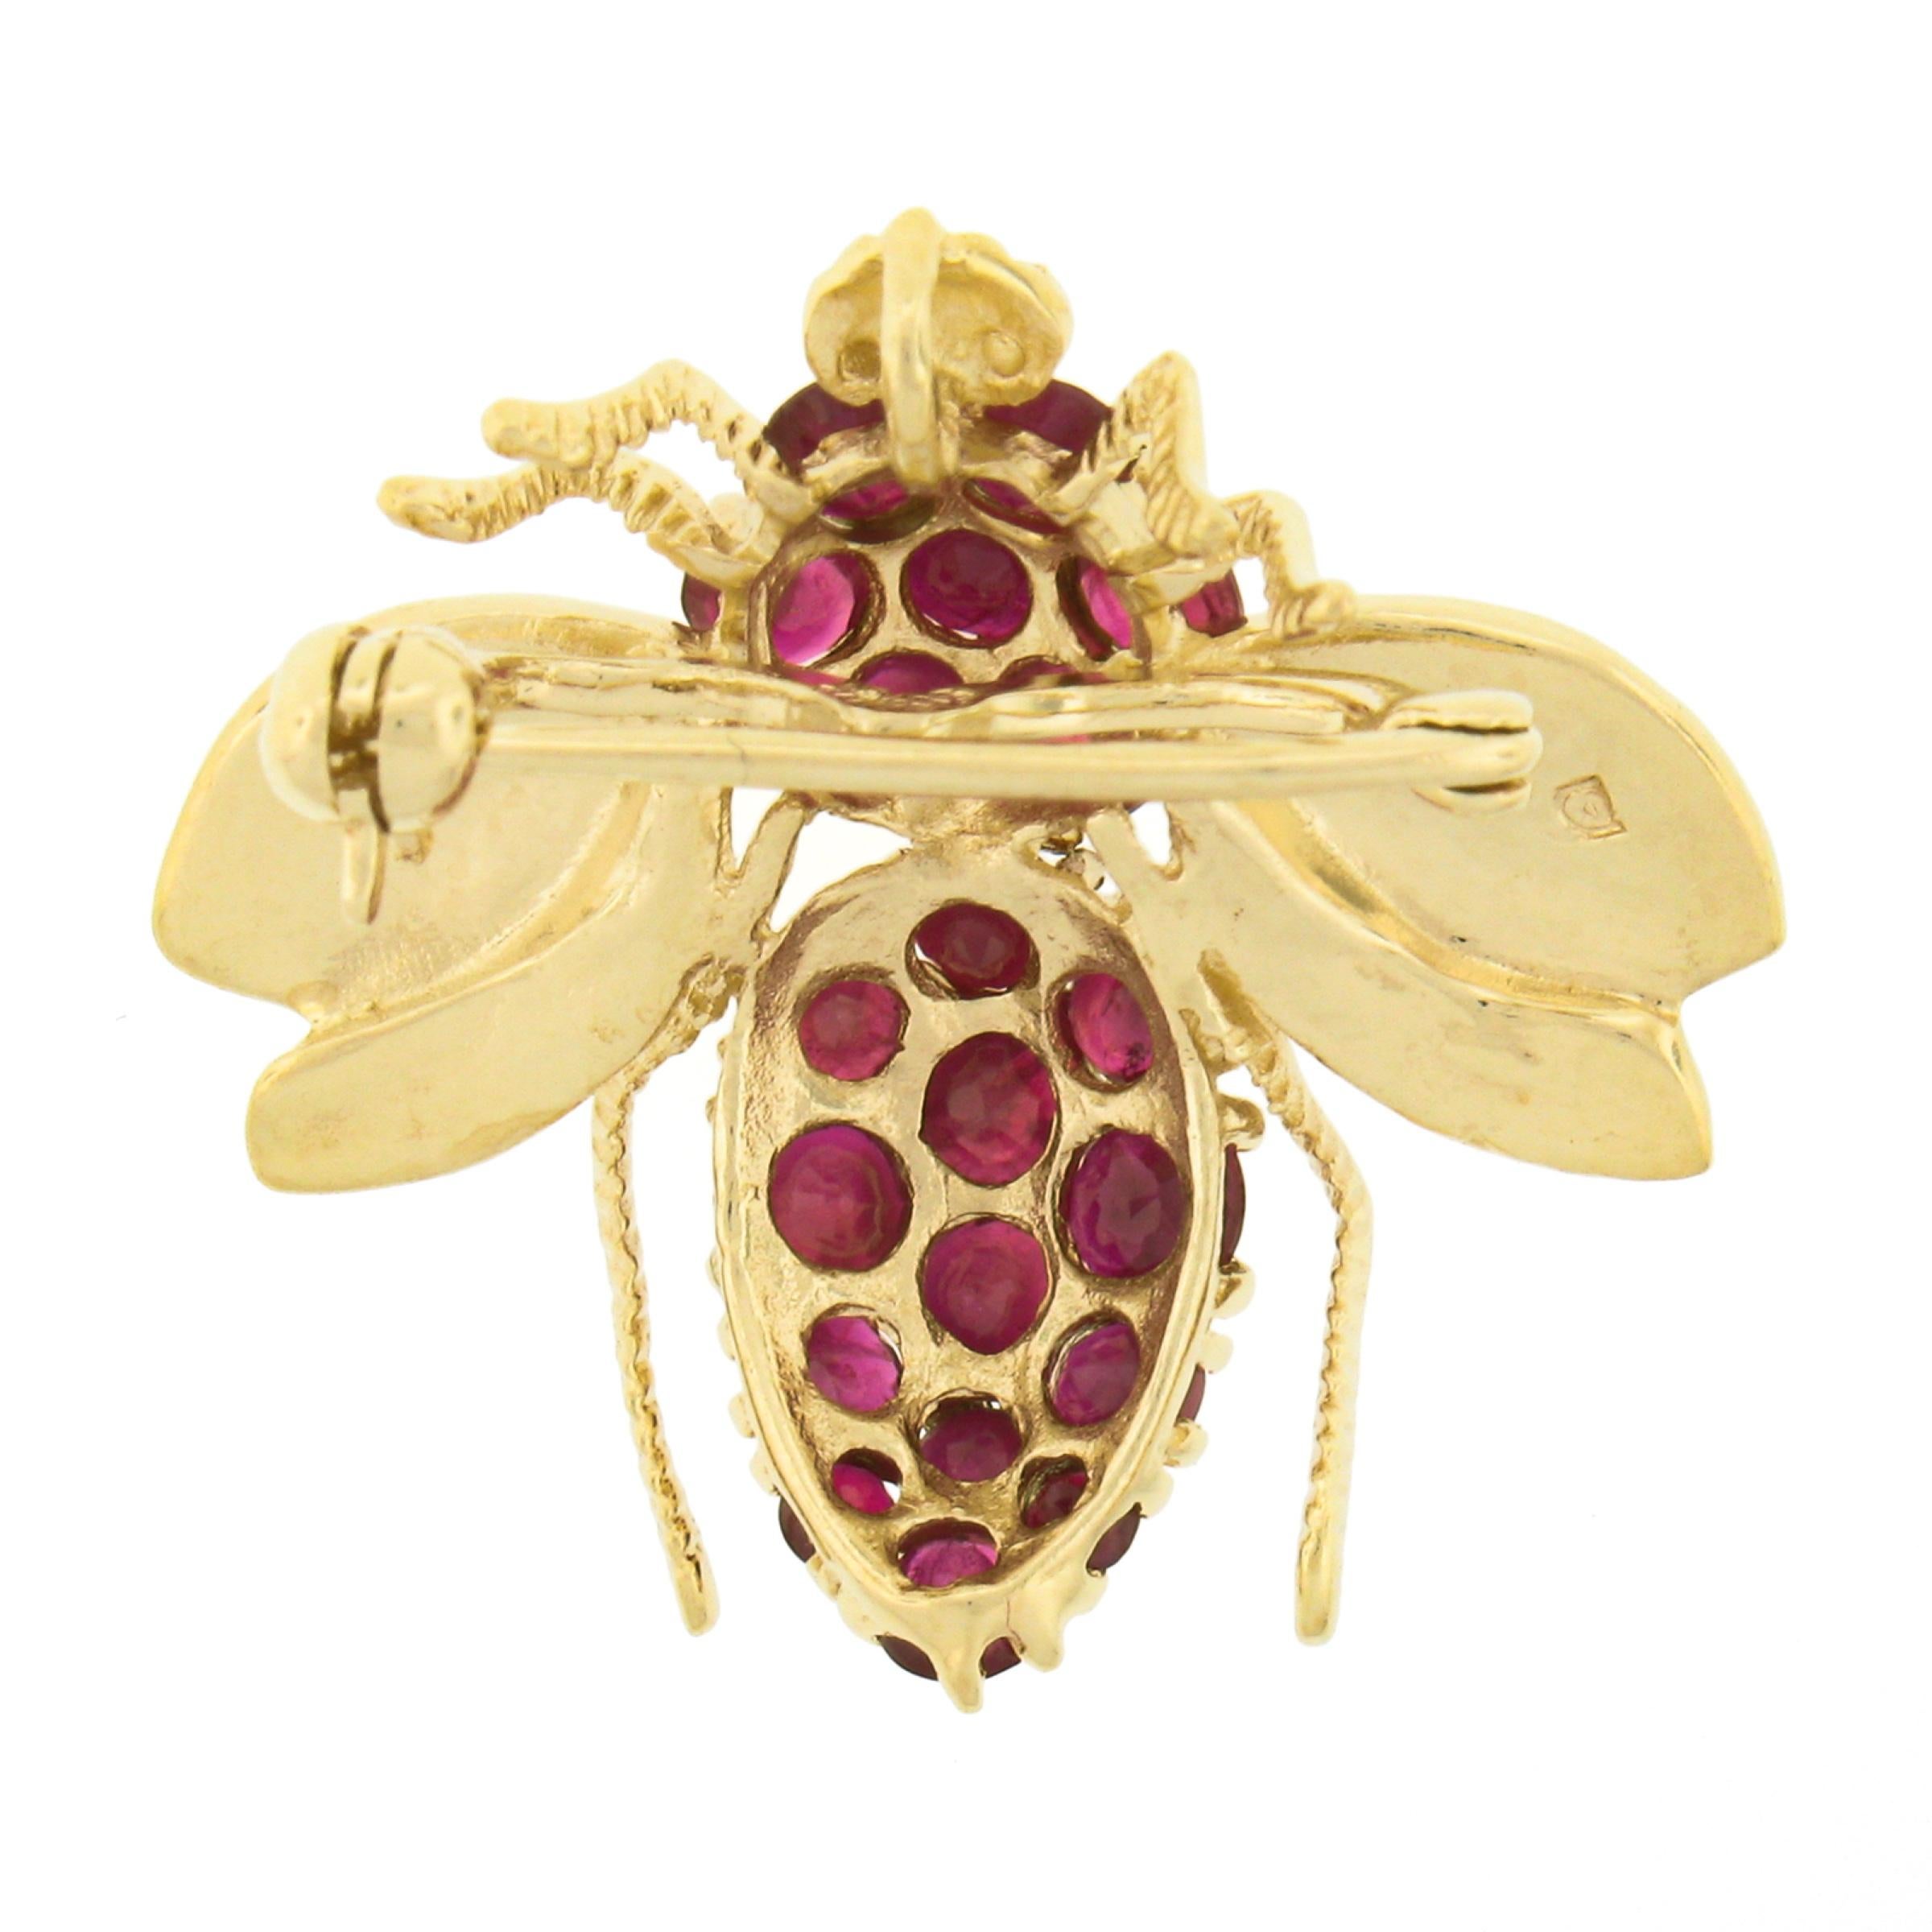 Here we have an incredibly detailed pin/brooch that was crafted from solid 14k yellow gold. The brooch features a fly/bee insect design that is drenched with fine quality rubies throughout its back. These round brilliant cut stones bring such an